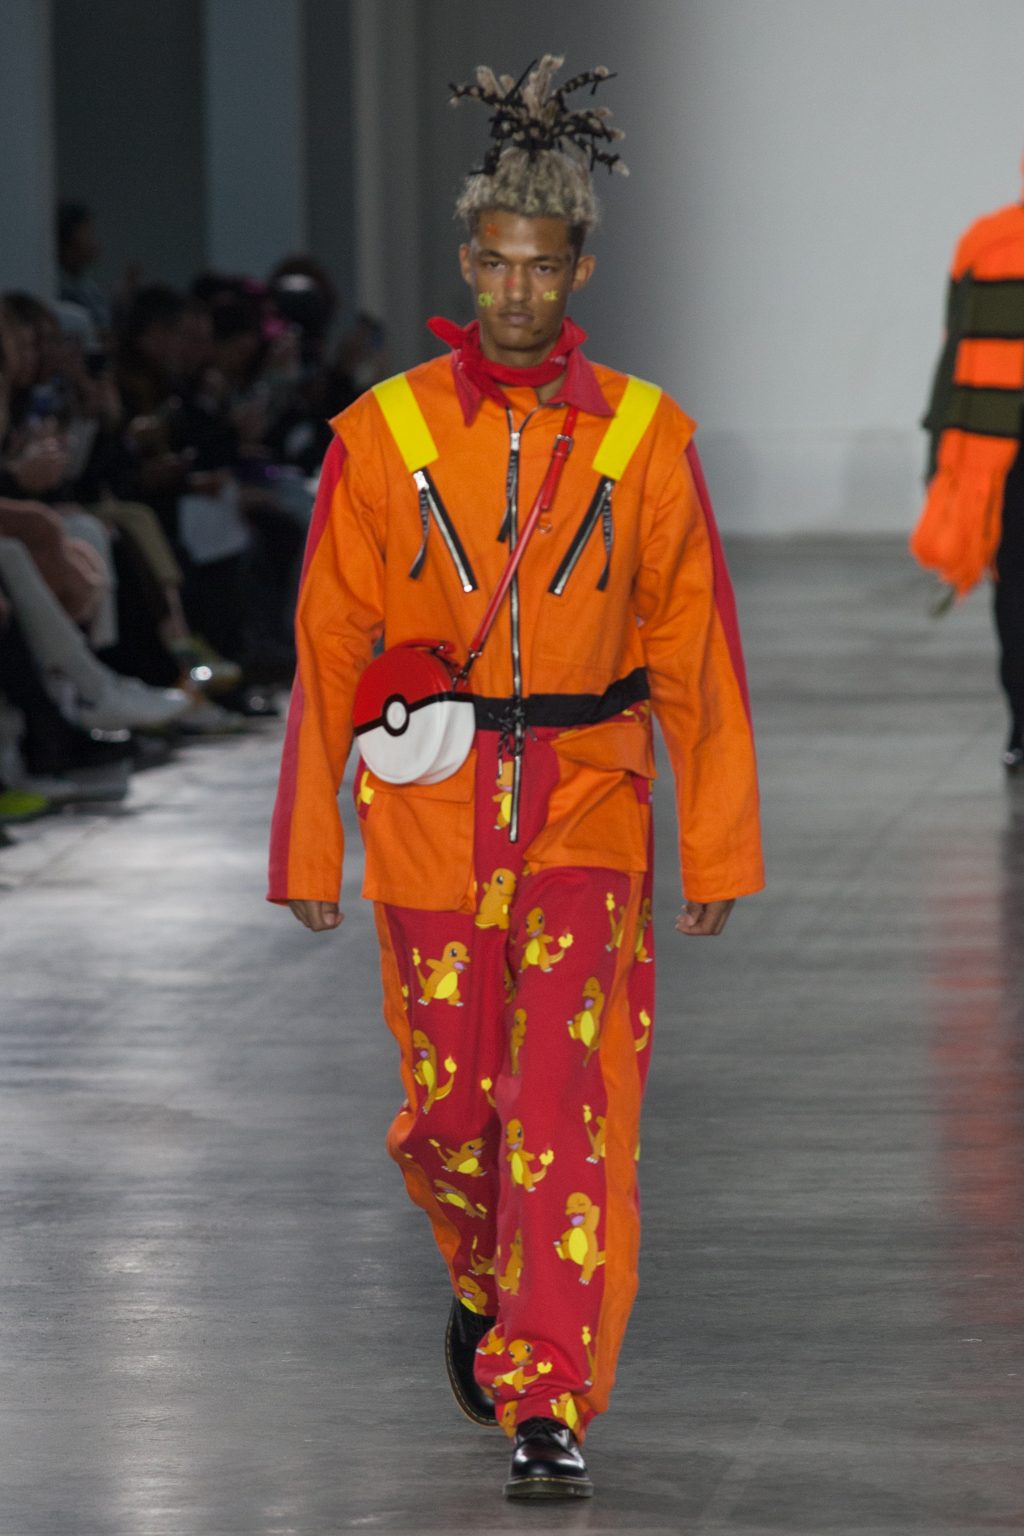 LFWM-AW19-Bobby-Abley-Huw-Jenkins-The-Upcoming-2-1024x1536.jpg